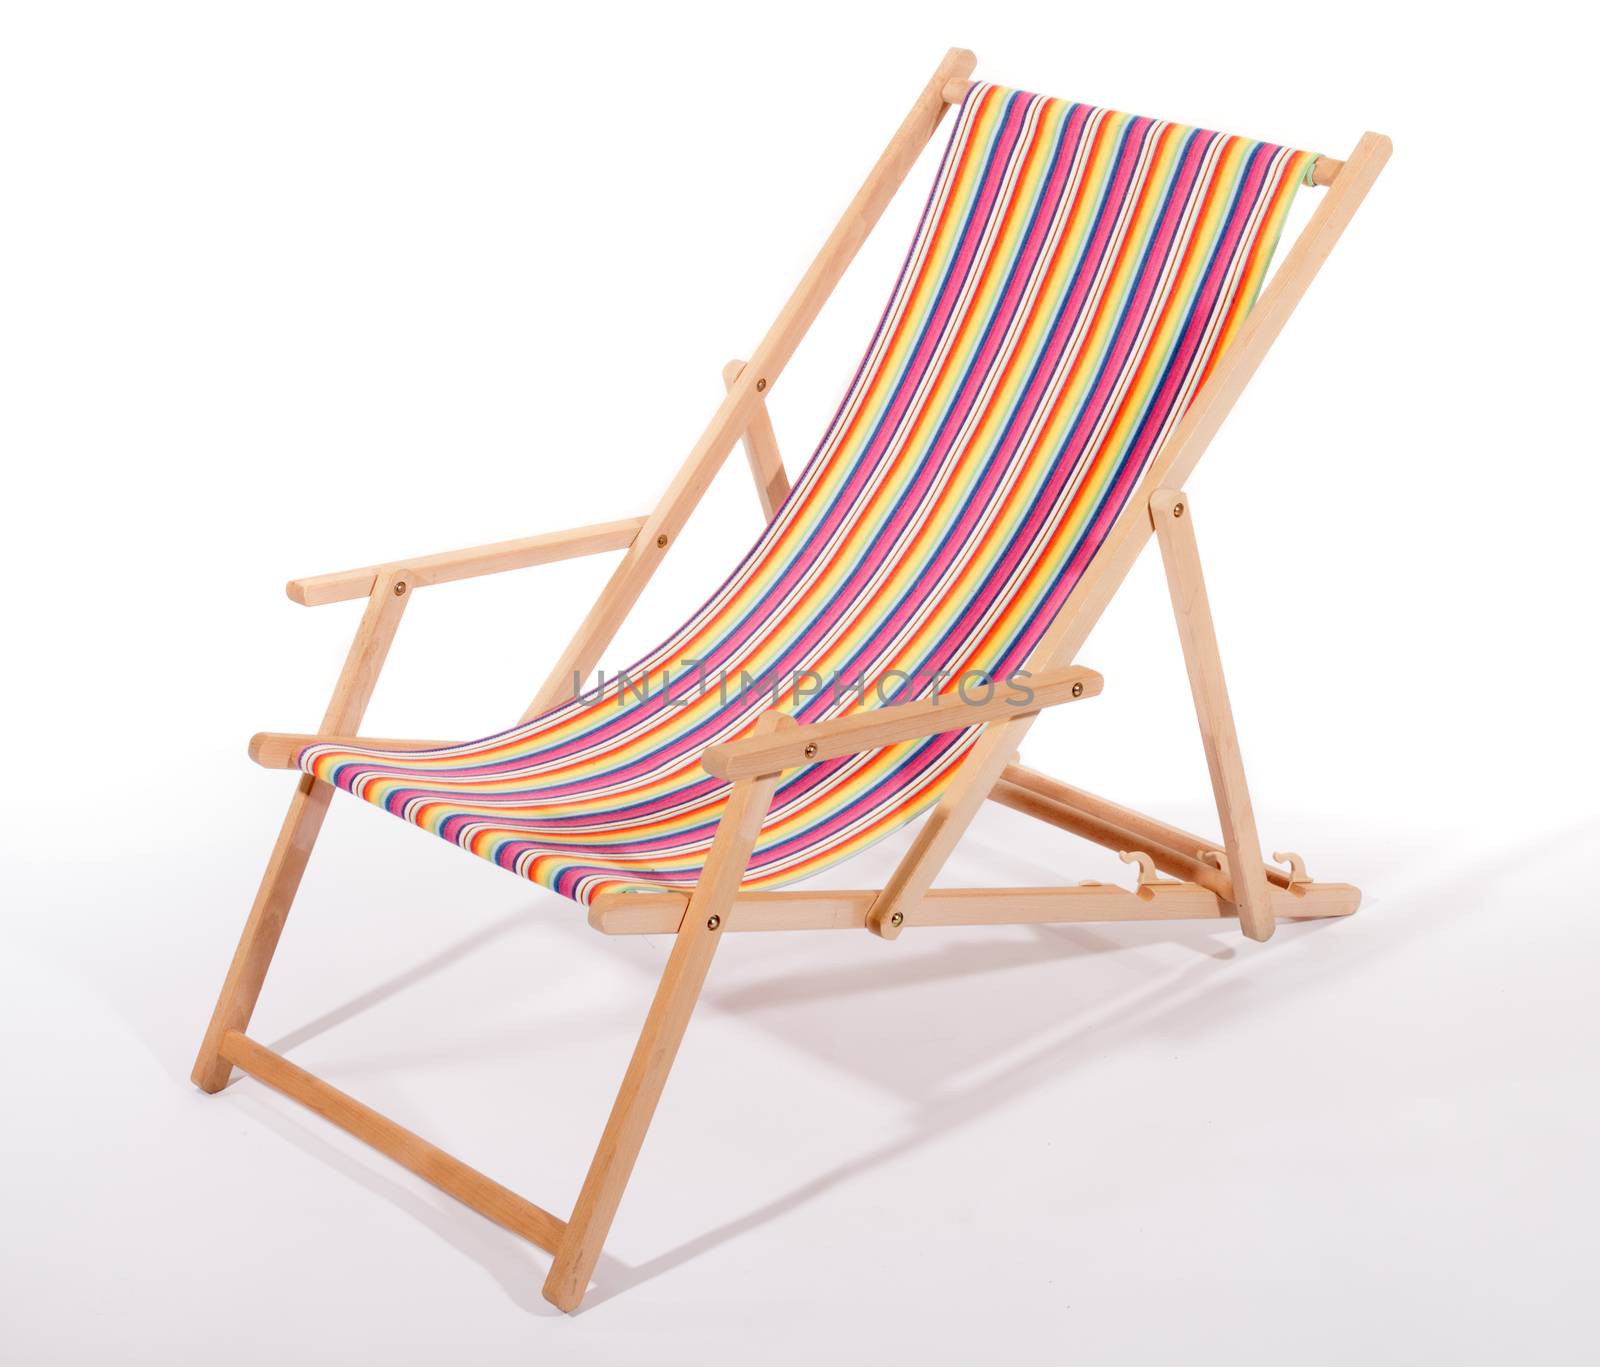 Wooden deck chair by aguirre_mar